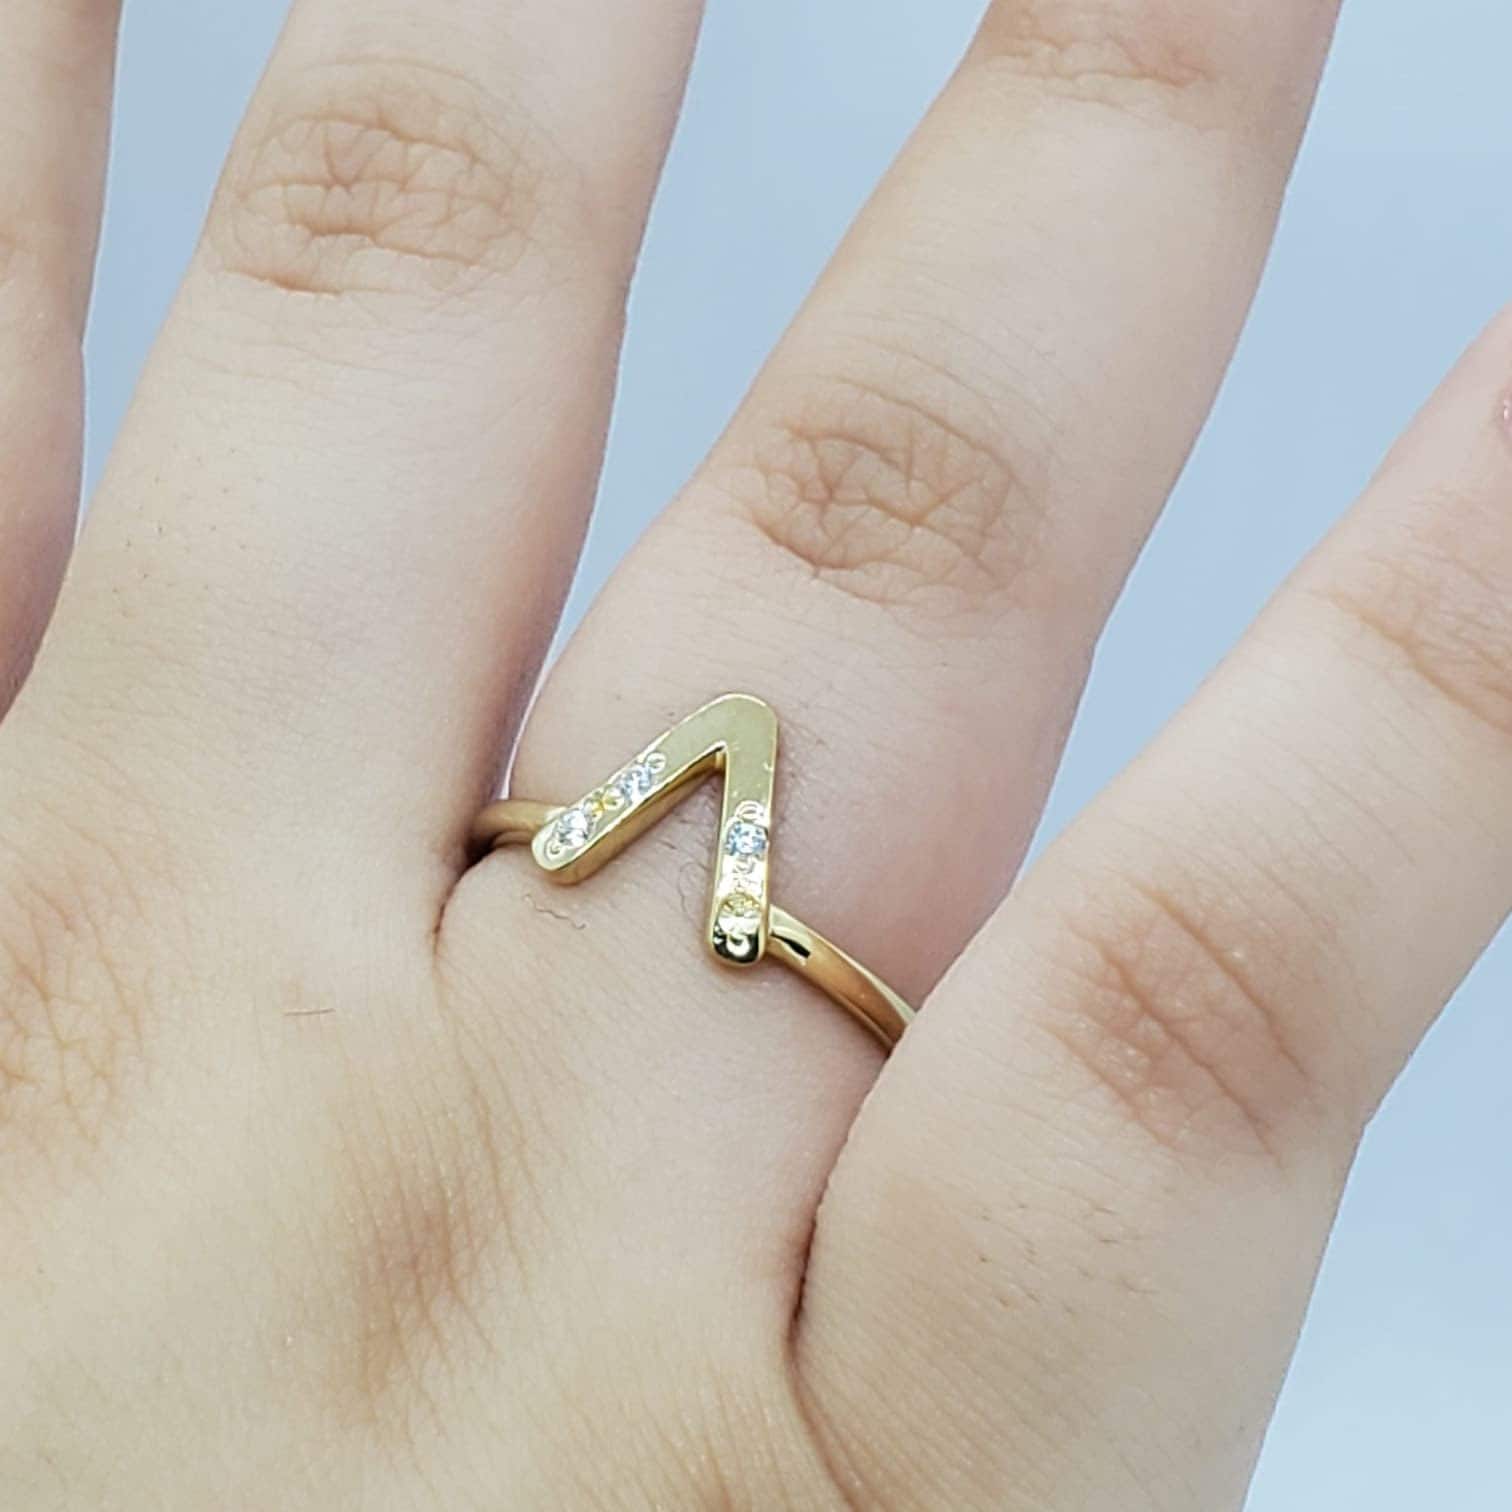 Buy Unique Stainless Steel Gold V Shape Ring, Modern Shape Rock Style Bold  Design Stacking Delicate Minimalist Layered Chic Ring, Gift for Her Online  in India - Etsy